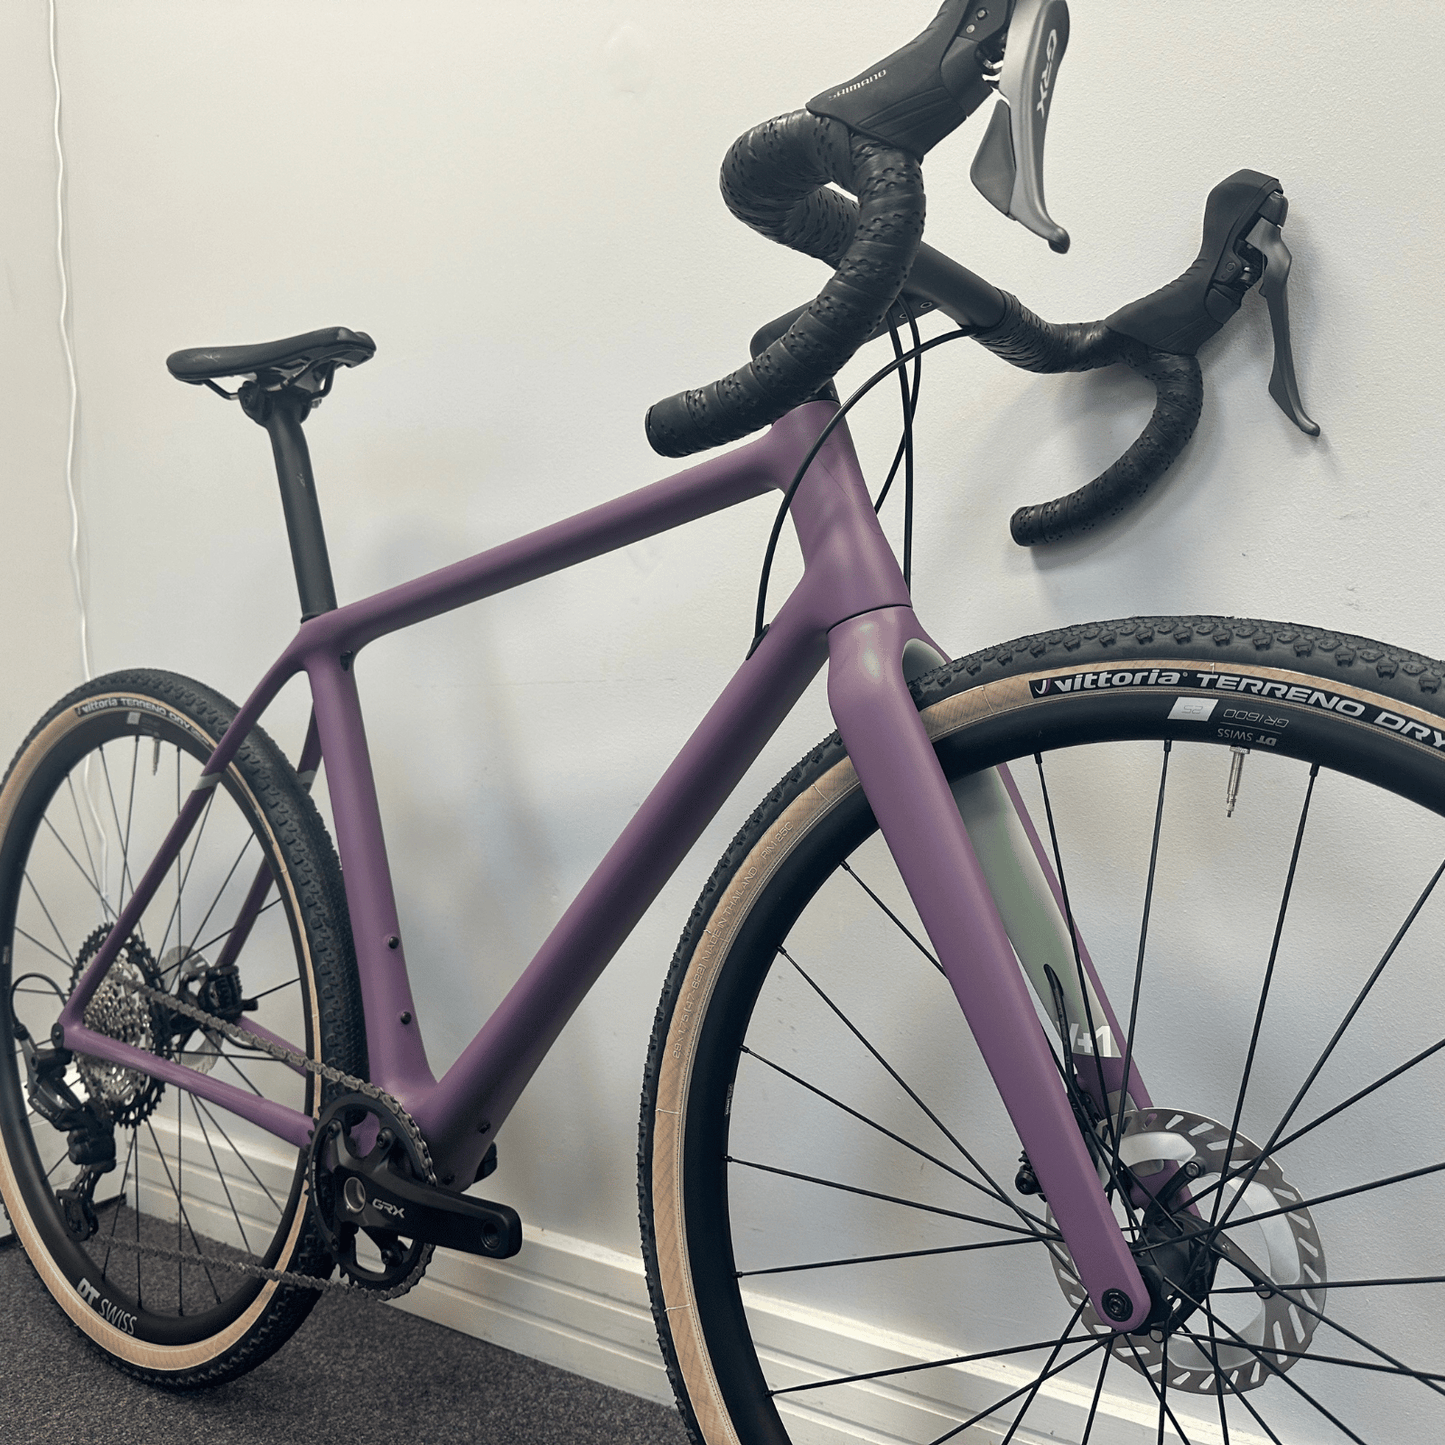 Vielo V+1 Medium Plum with Shimano GRX and DT Swiss GR1600 wheels